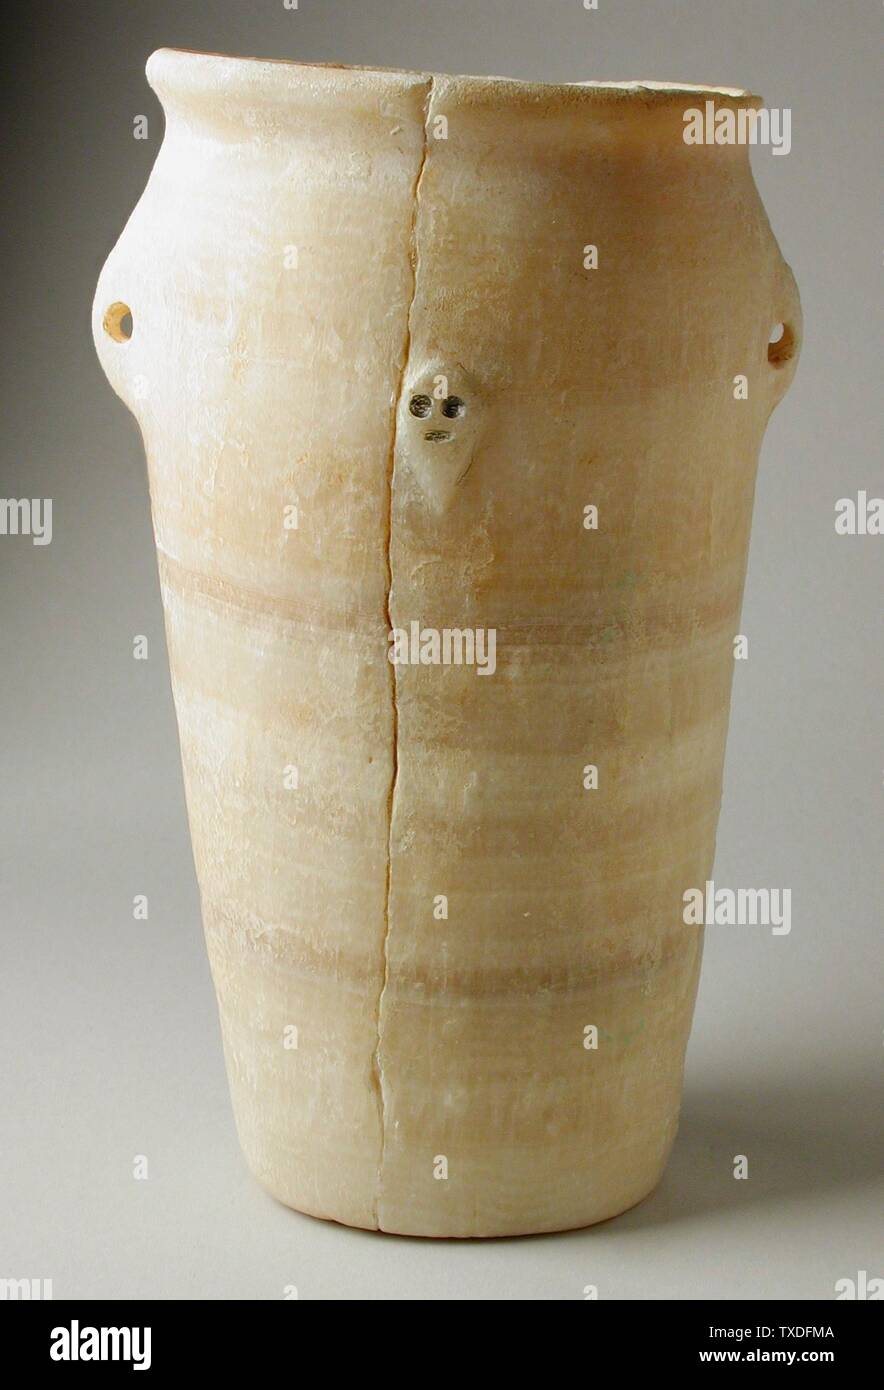 Vase; Egypt, Predynastic Period (5500 - 3100 BCE) Furnishings; Accessories Calcite 7 1/4 x 4 12 in.  (18.4 x 11.4 cm) Gift of Carl W. Thomas (M.80.203.181) Egyptian Art; Predynastic Period (5500 - 3100 BCE); Stock Photo